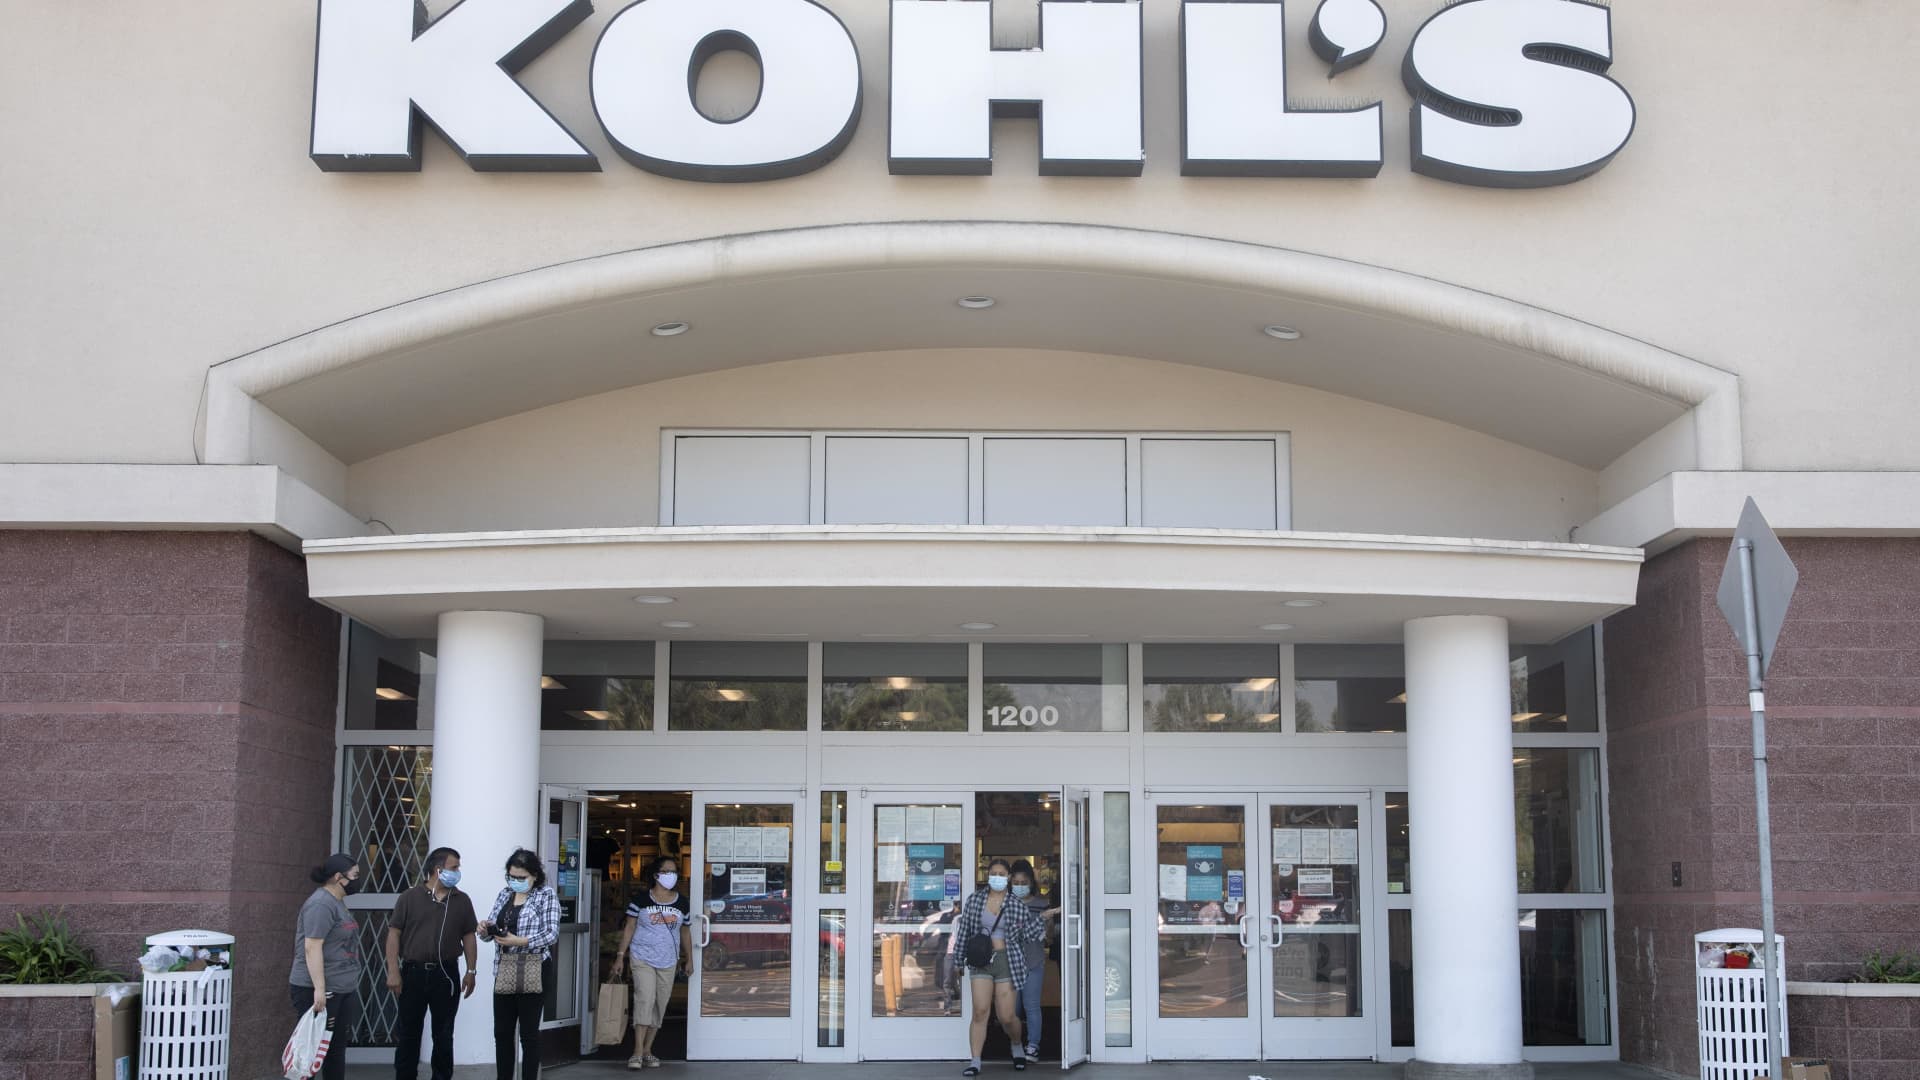 Kohl’s (KSS) Q2 2021 earnings beat estimates, guidance is boosted